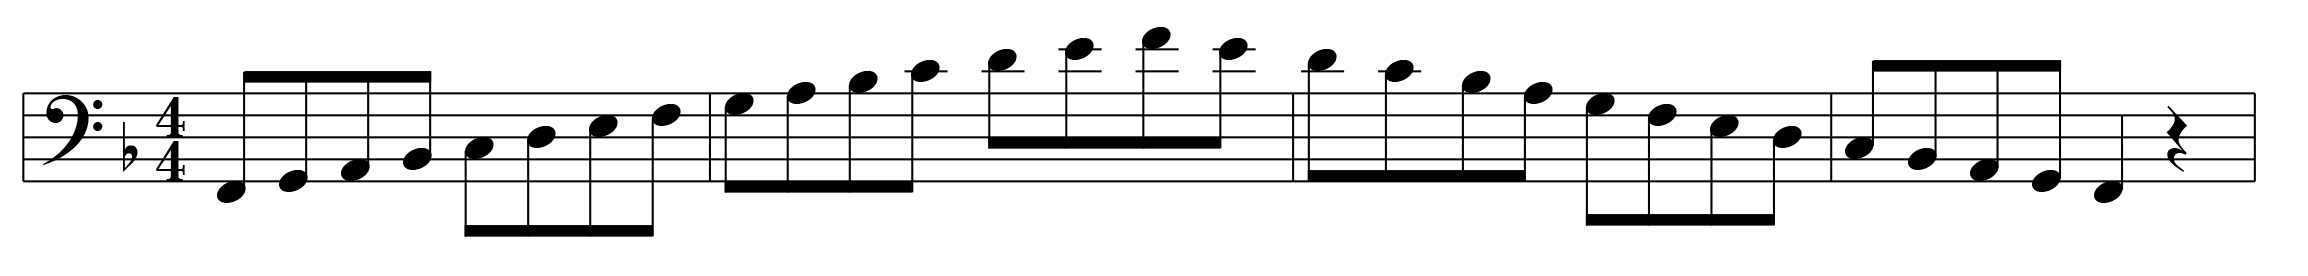 F Major Scale Left Hand